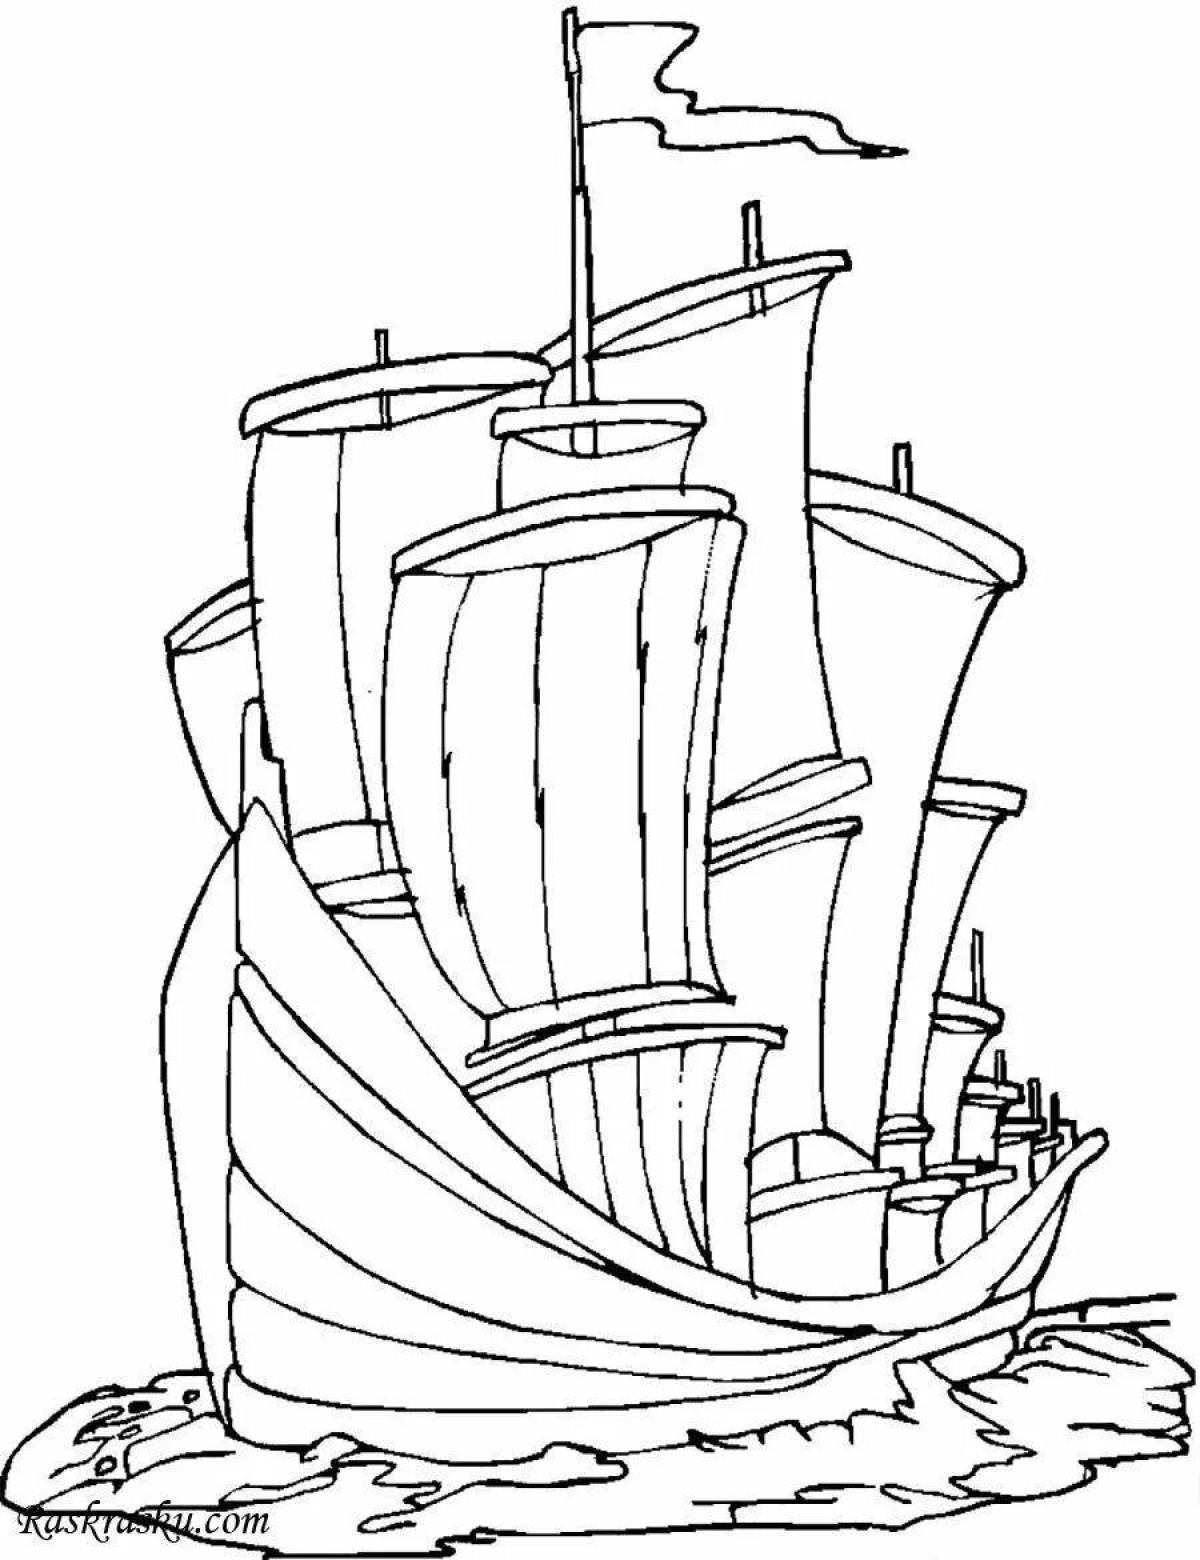 Sailboat coloring page for toddlers